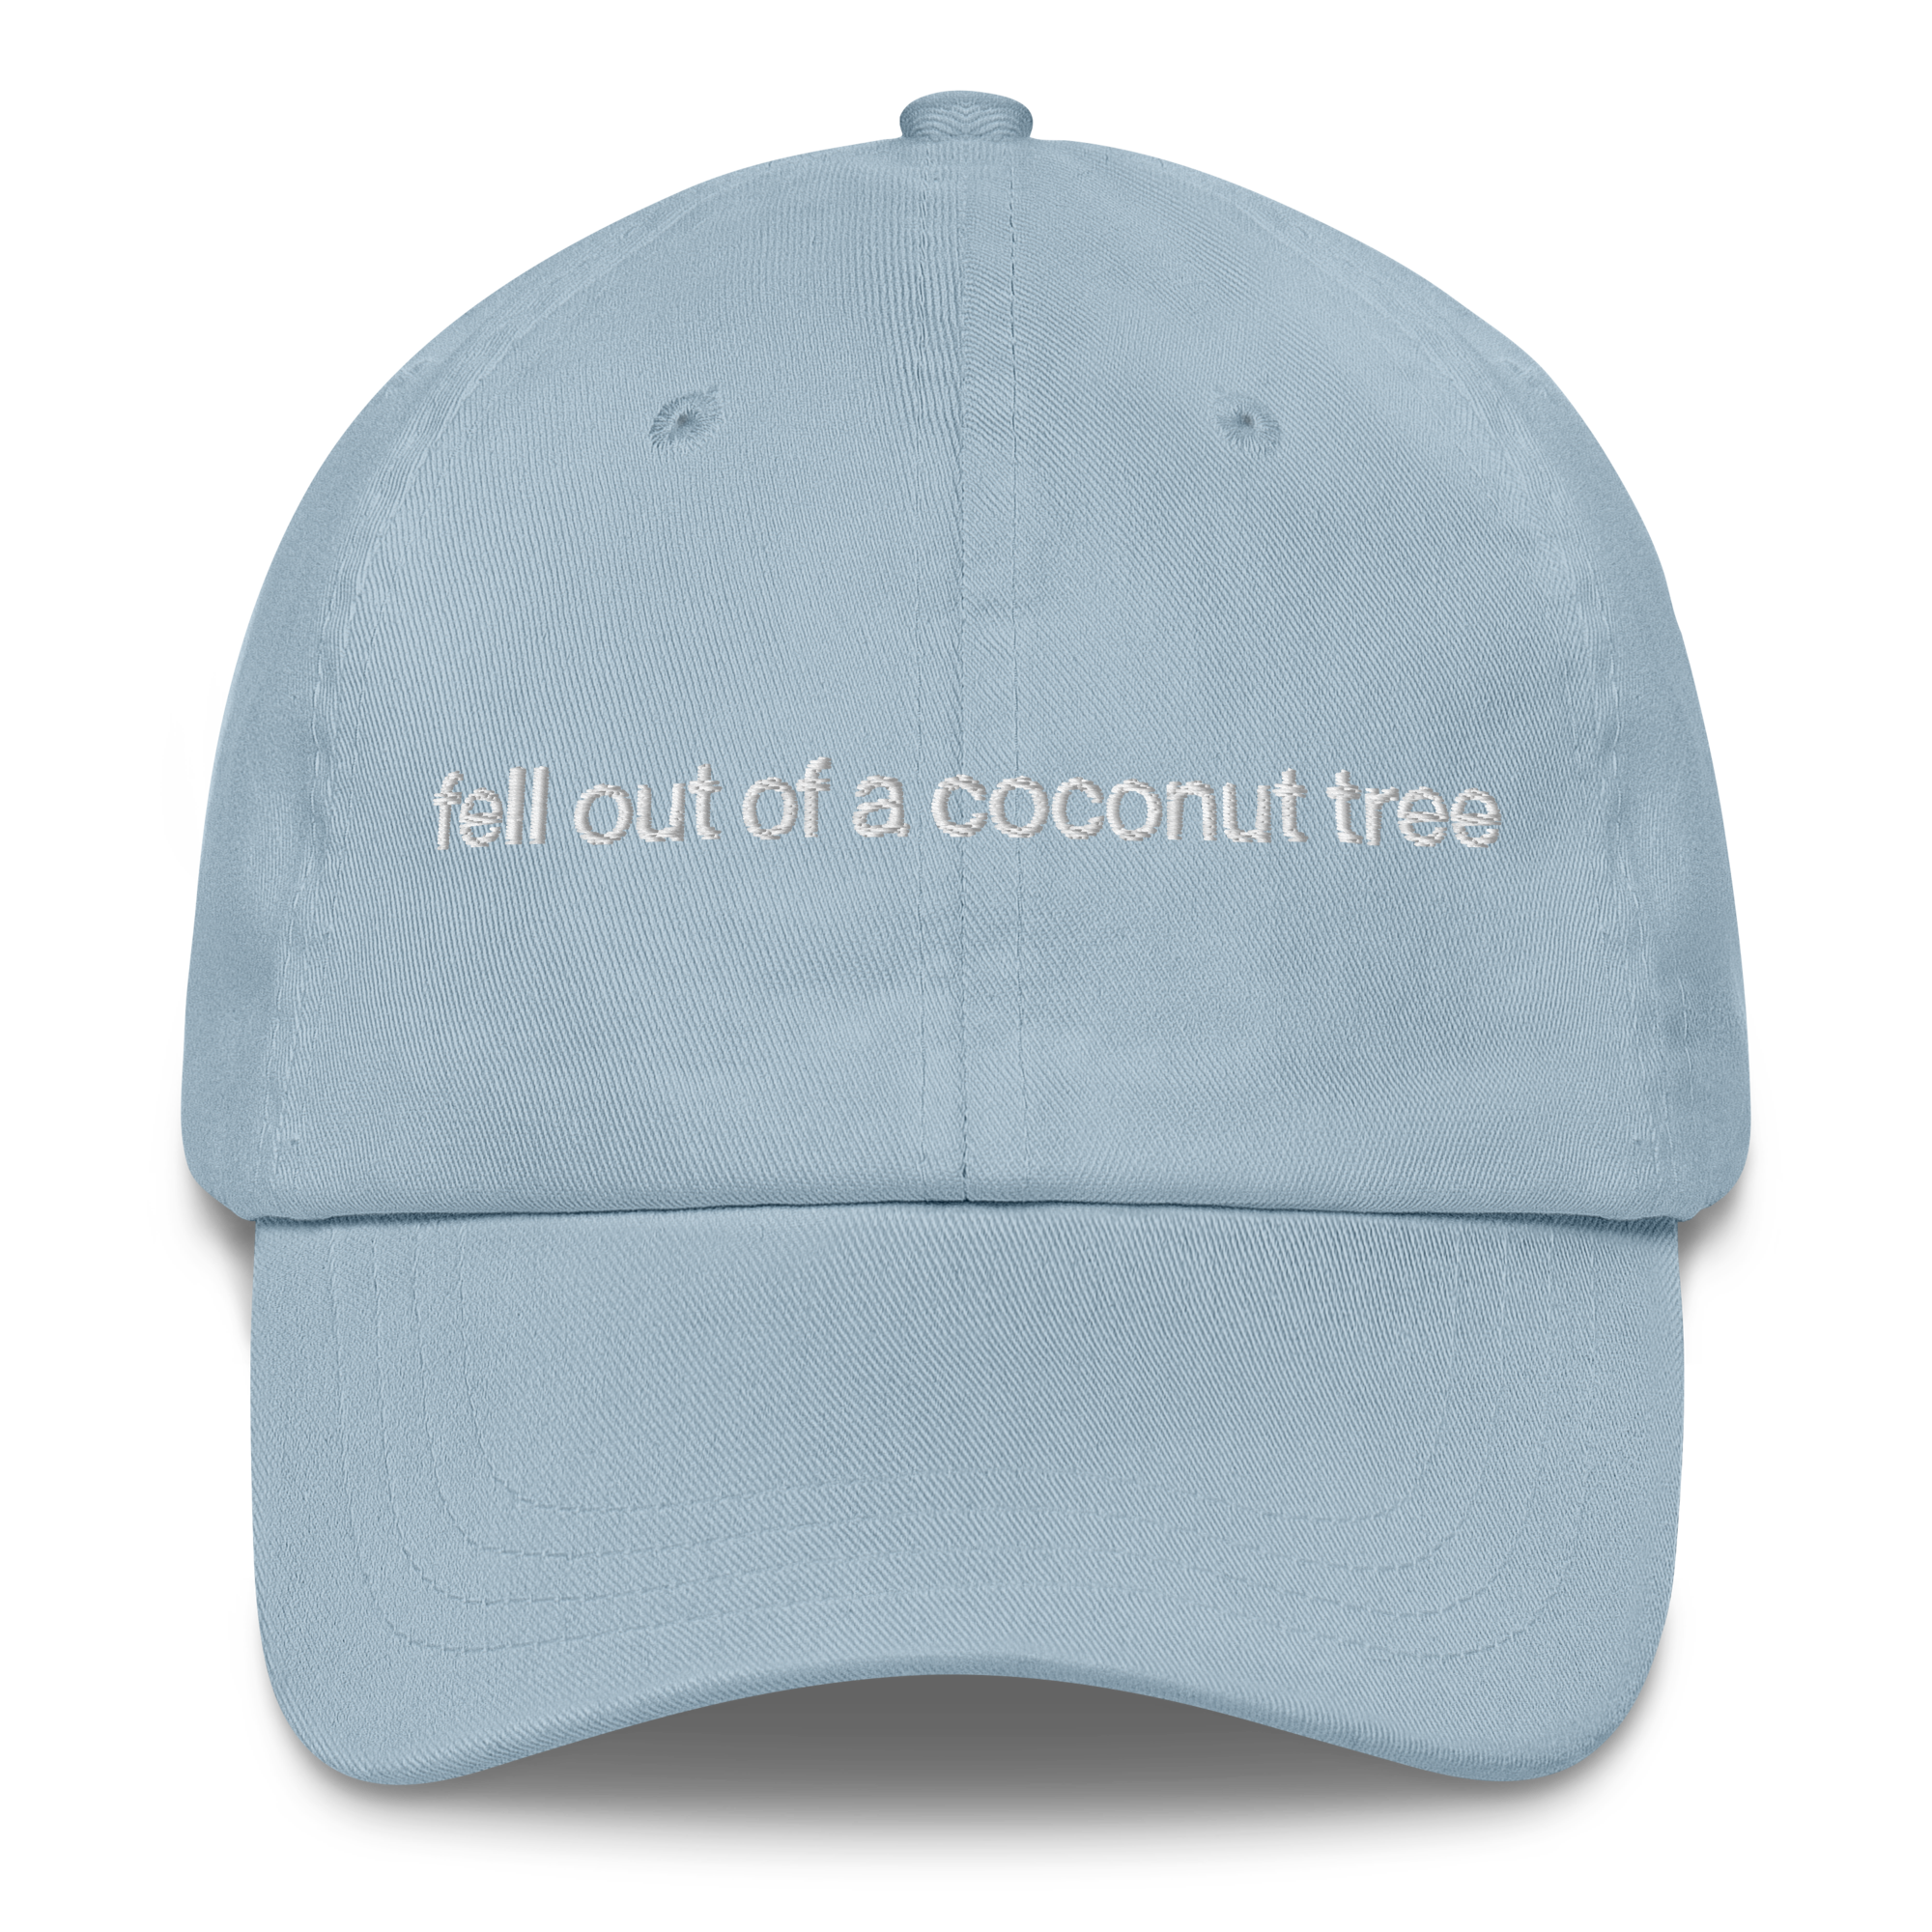 classic-dad-hat-light-blue-front-669e8590eec16.png